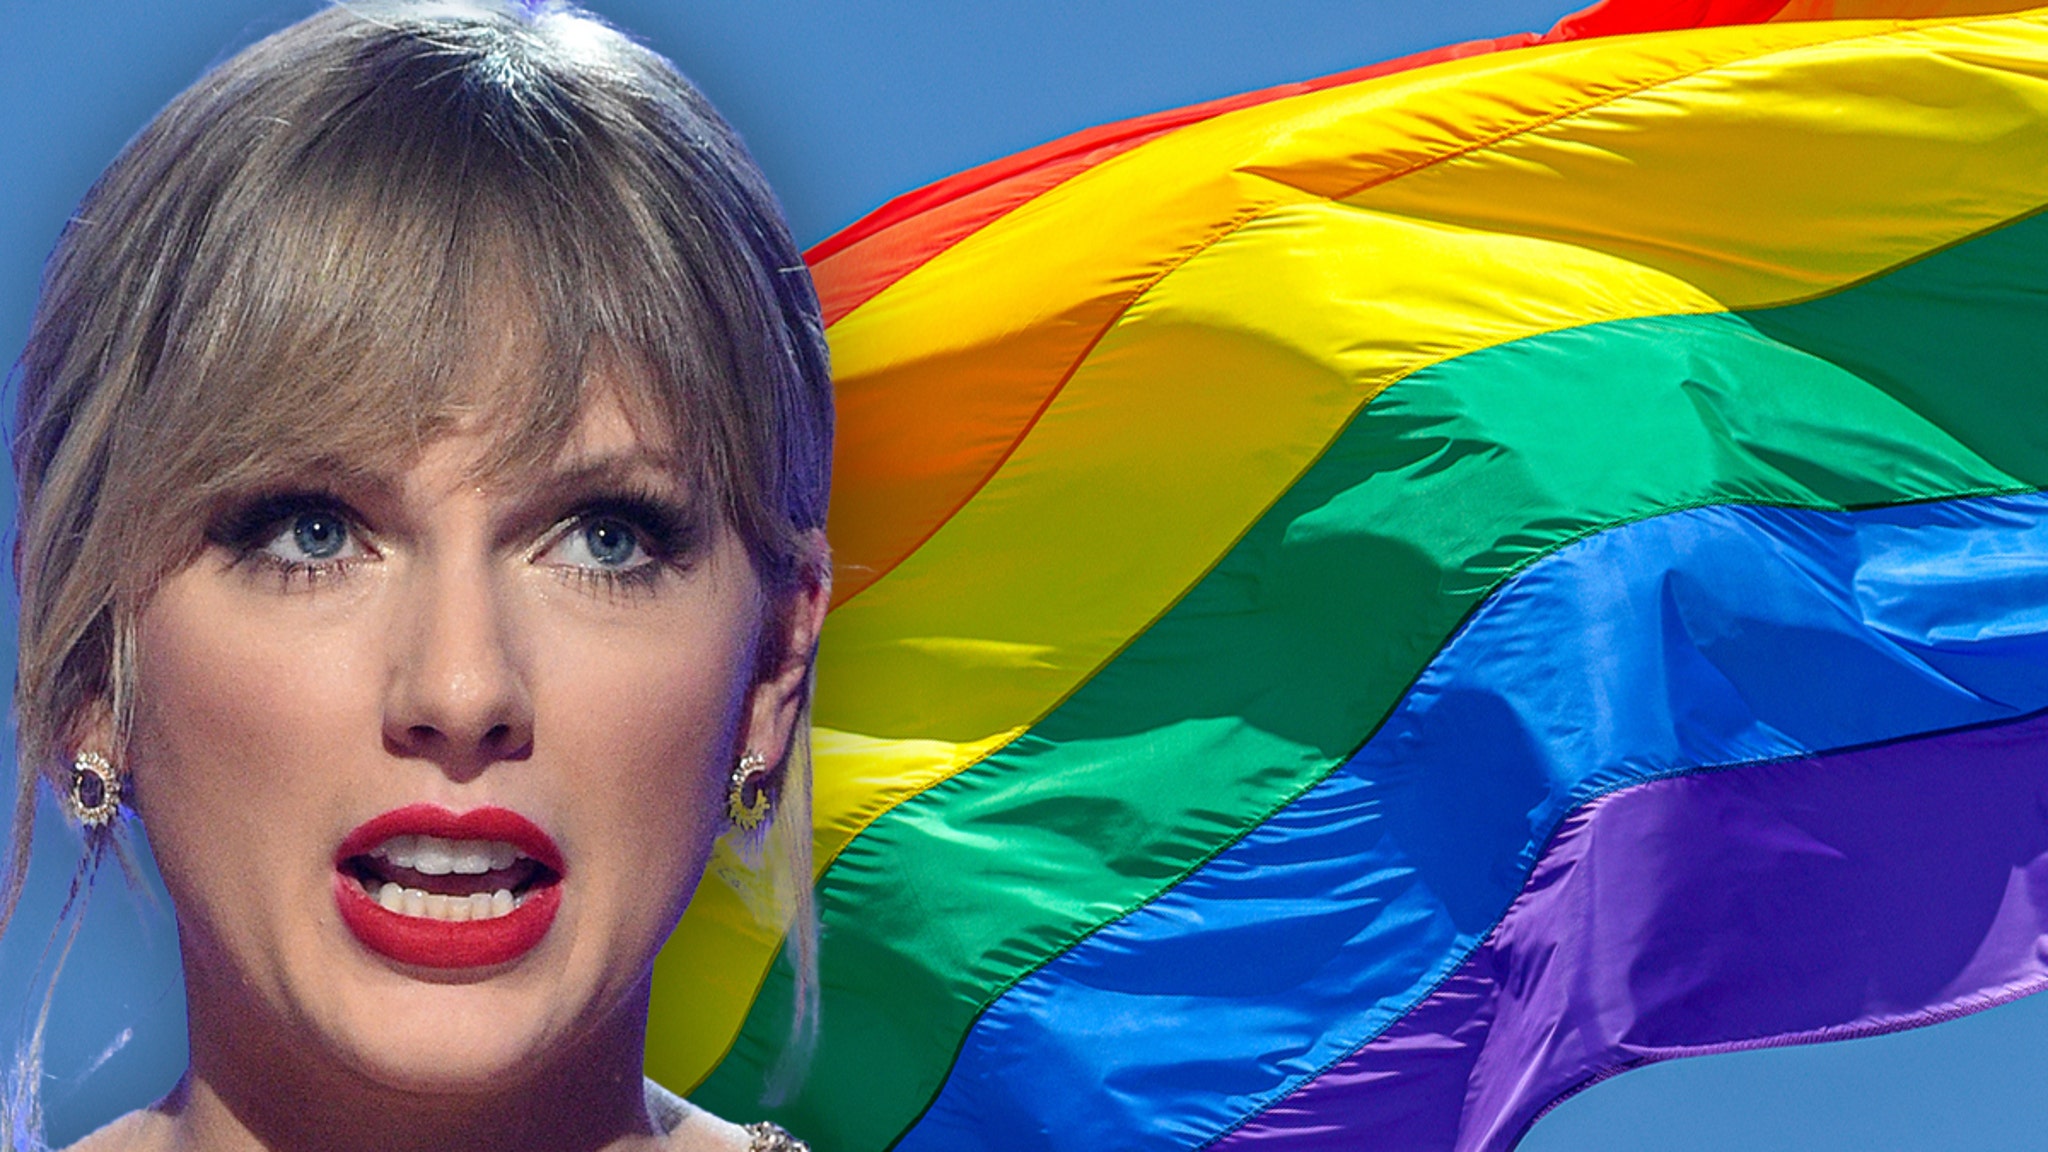 Taylor Swift Associates Pissed About Article Speculating on Her Sexuality